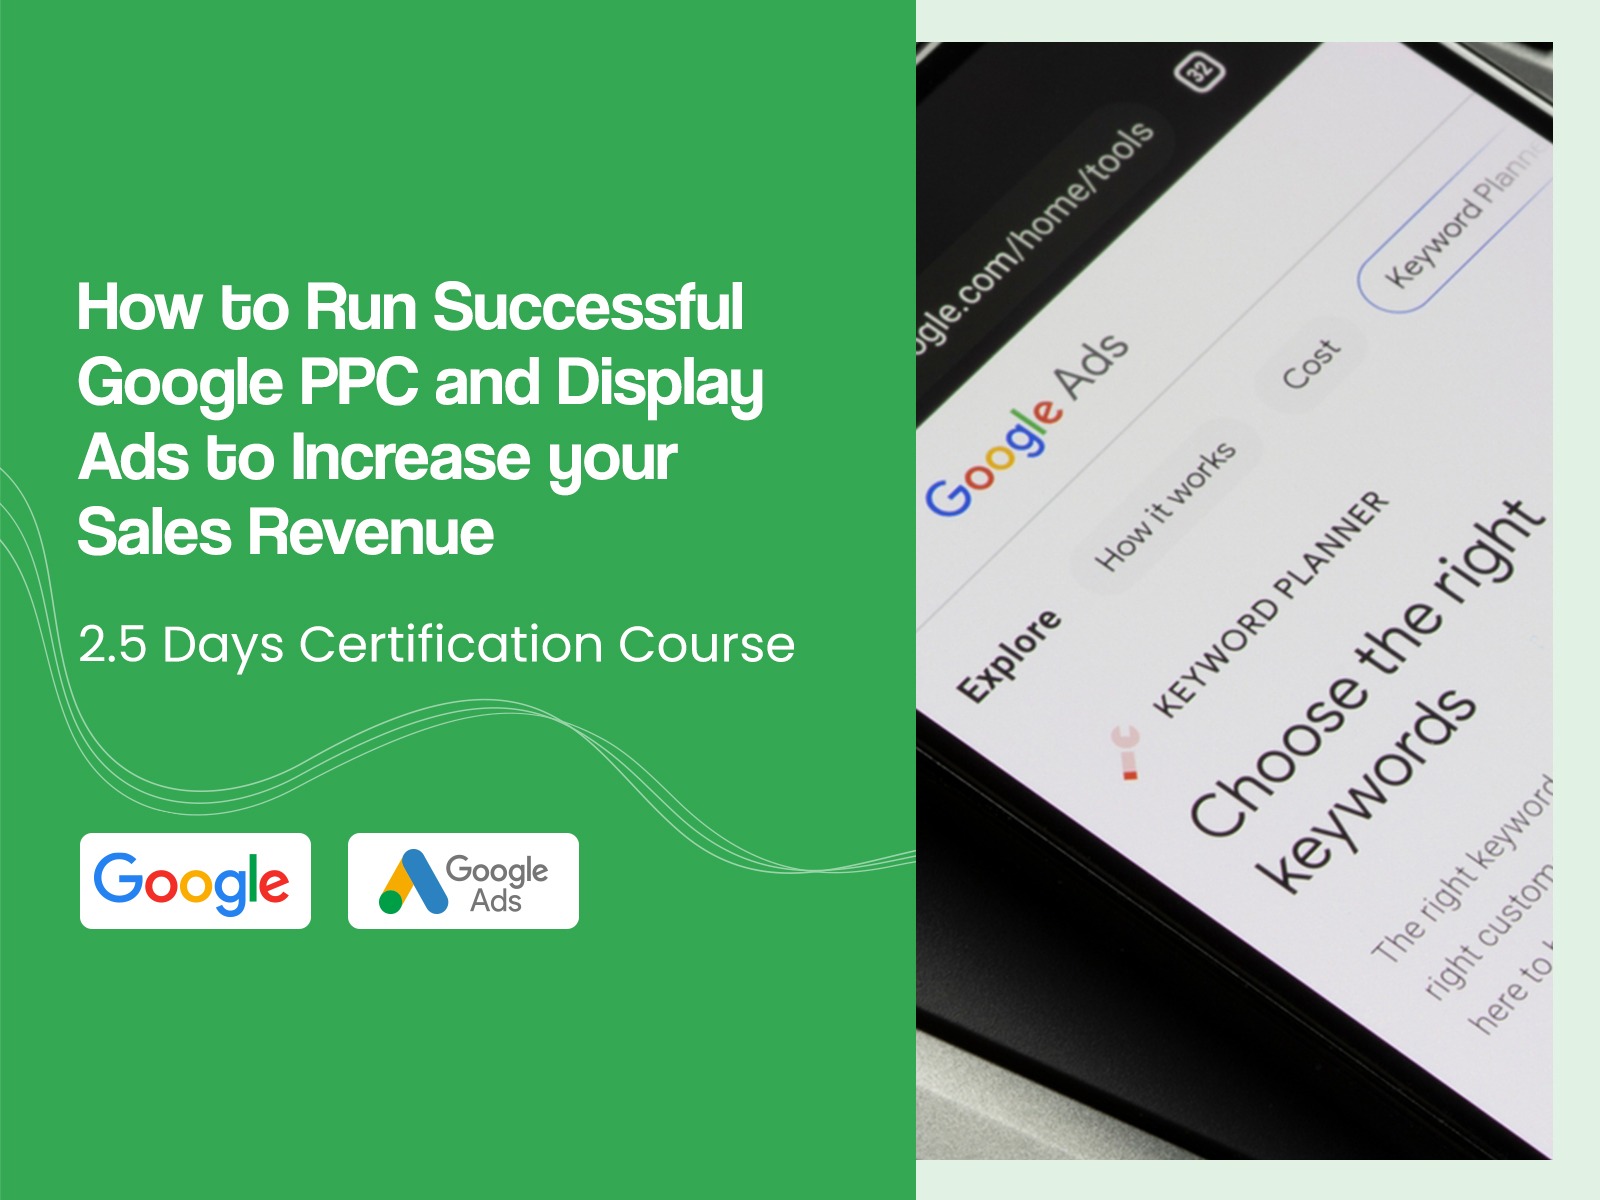 Run Successful Google Search Engine Marketing Campaigns For PPC and Display Ads